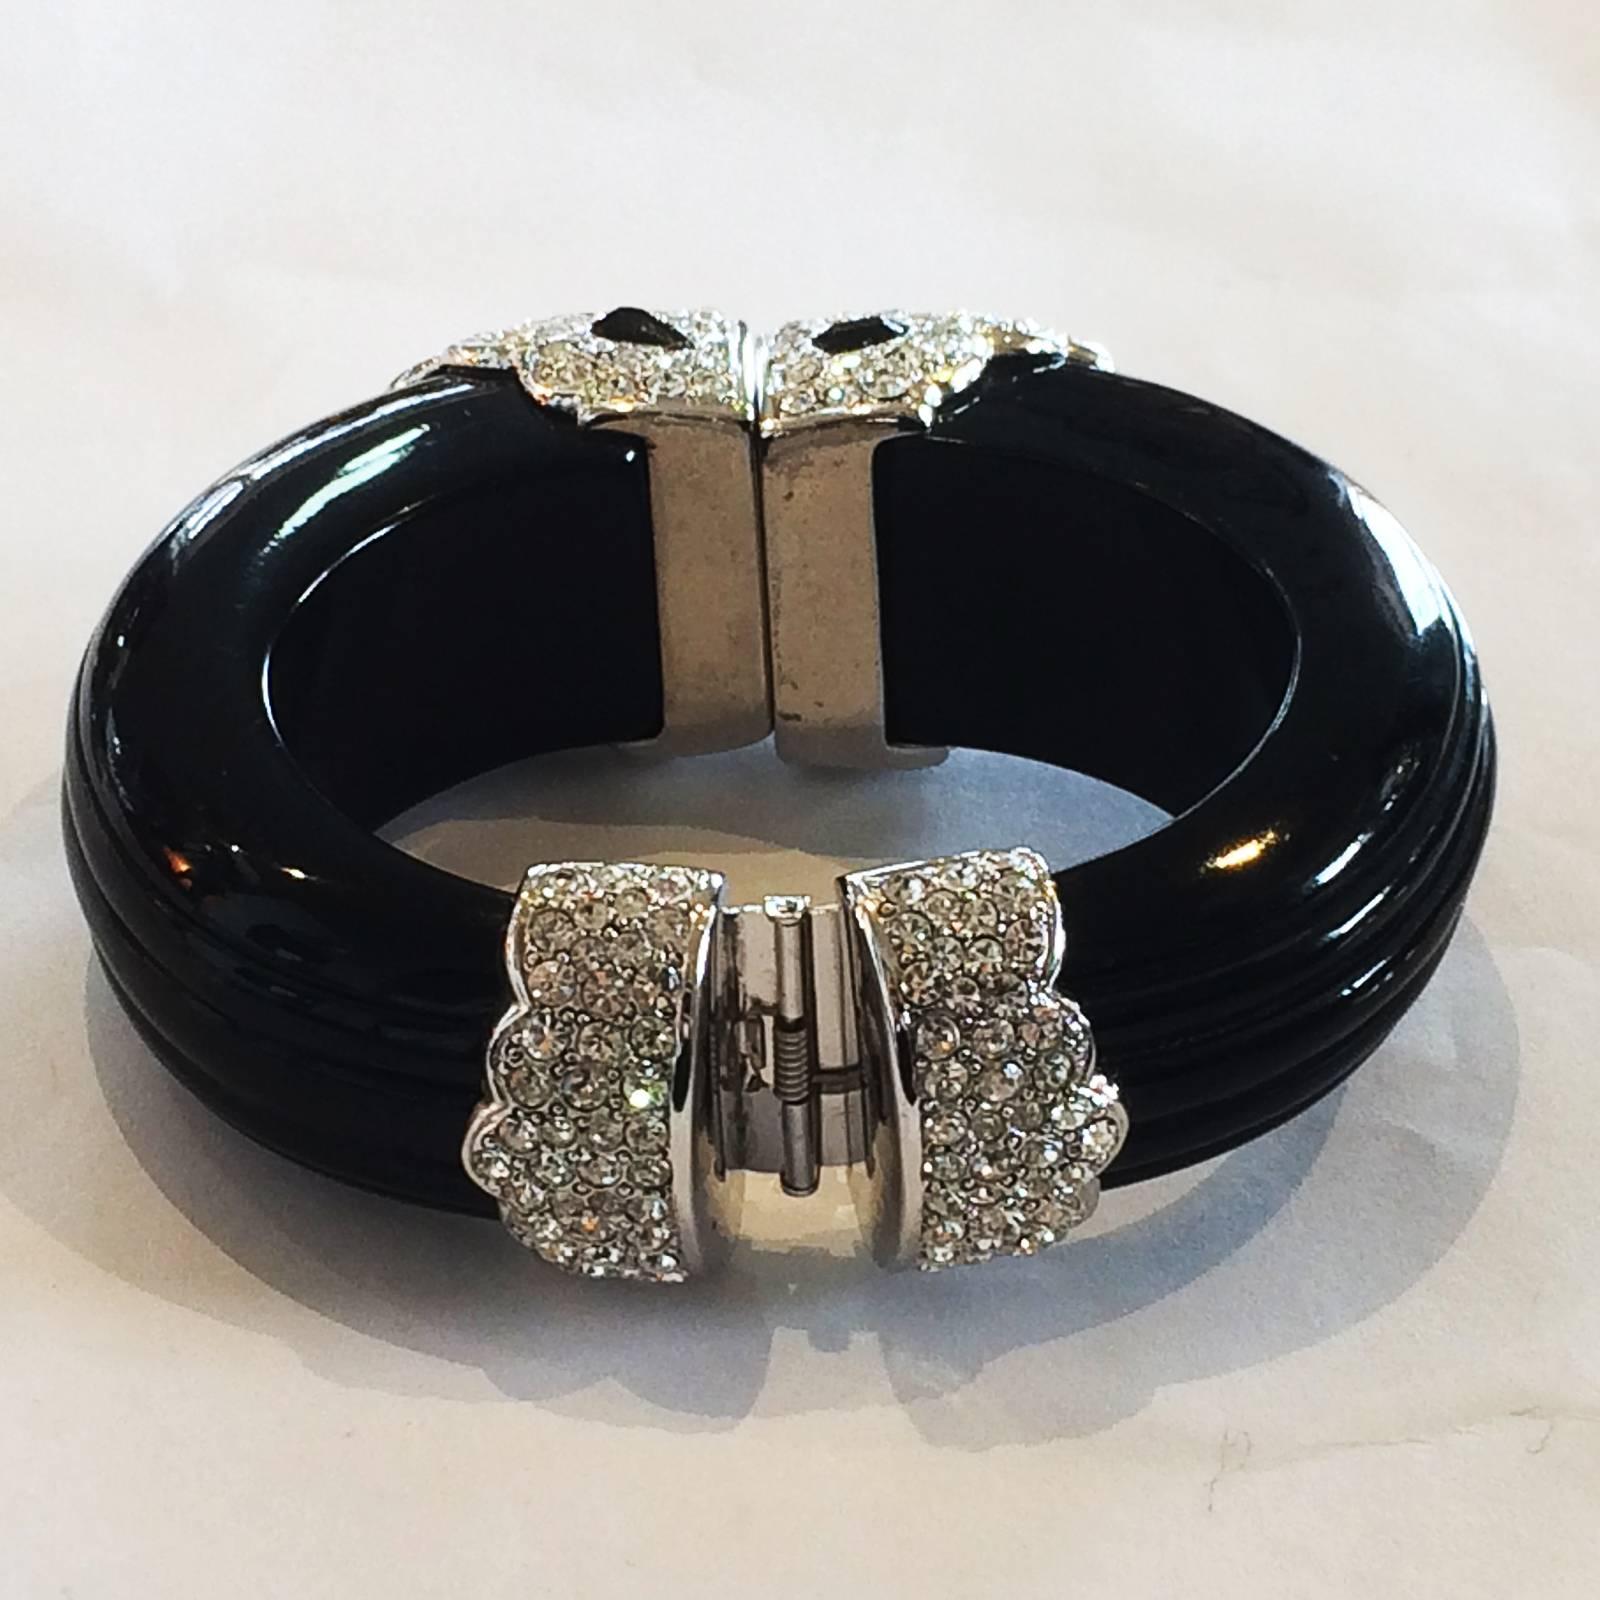 Art Deco Kenneth J. Lane, Clamper Bangle, in Black Enamel body, with Crystal Diamantes at front and rear, and the front highlighted various shaped Black Diamantes, all set in silver tone base. The Bangle has the manufacture mark of “KENNETH” “C”